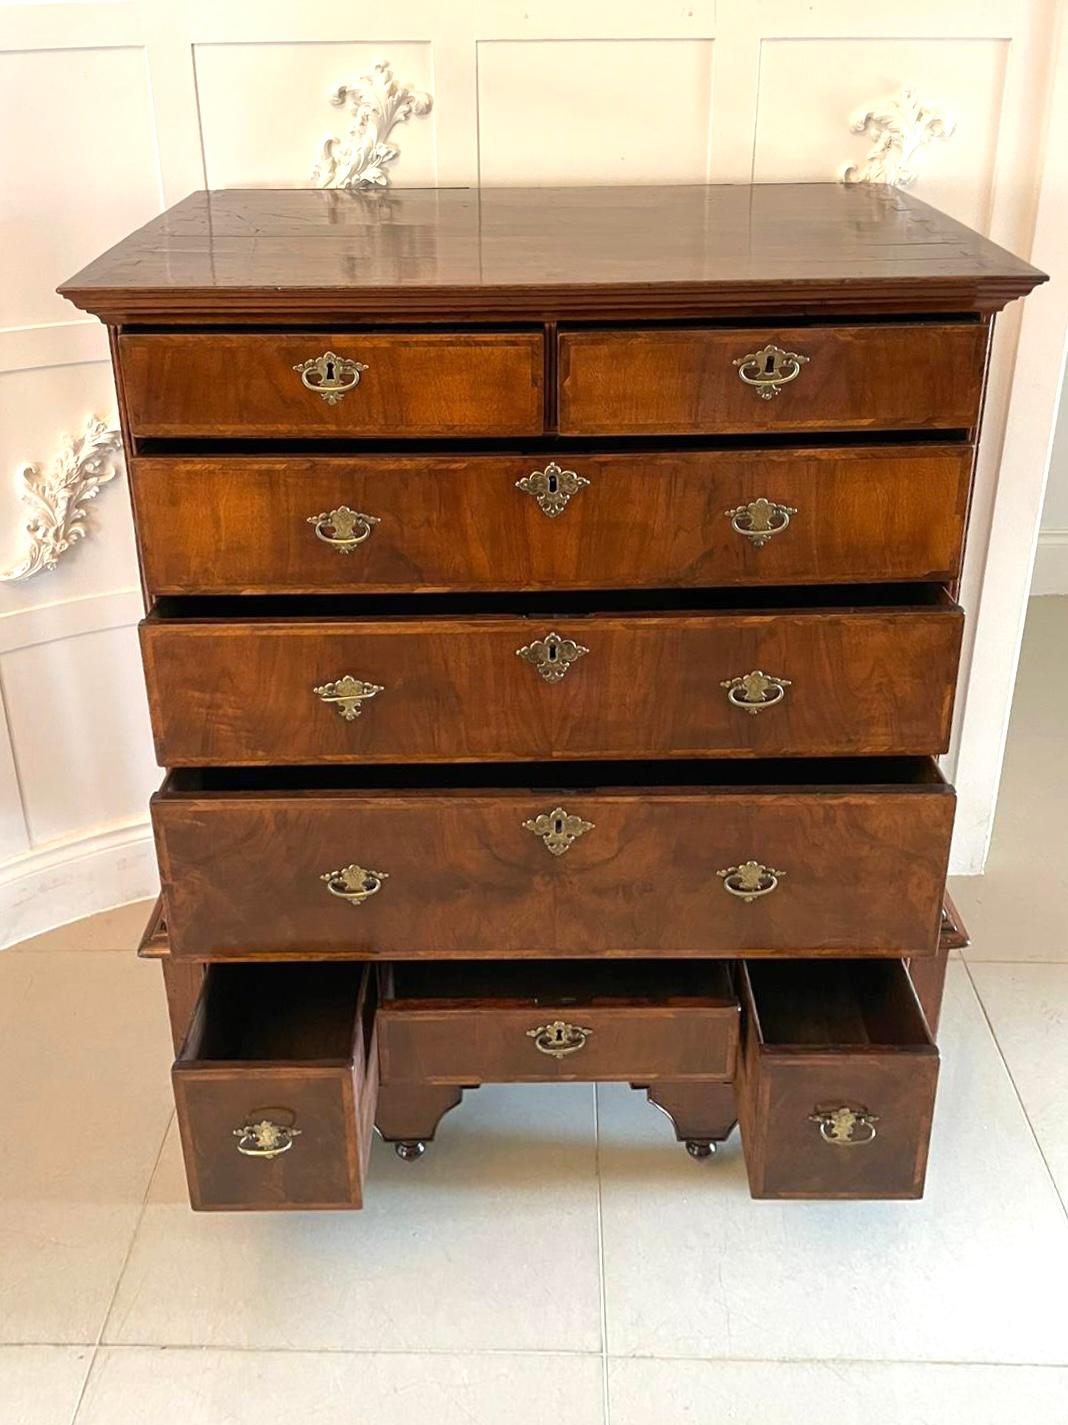 Antique William and Mary quality figured walnut chest on stand having a quality figured walnut polished rectangular shaped top above two short and three long herringbone inlaid figured walnut oak lined drawers, original engraved brass handles and